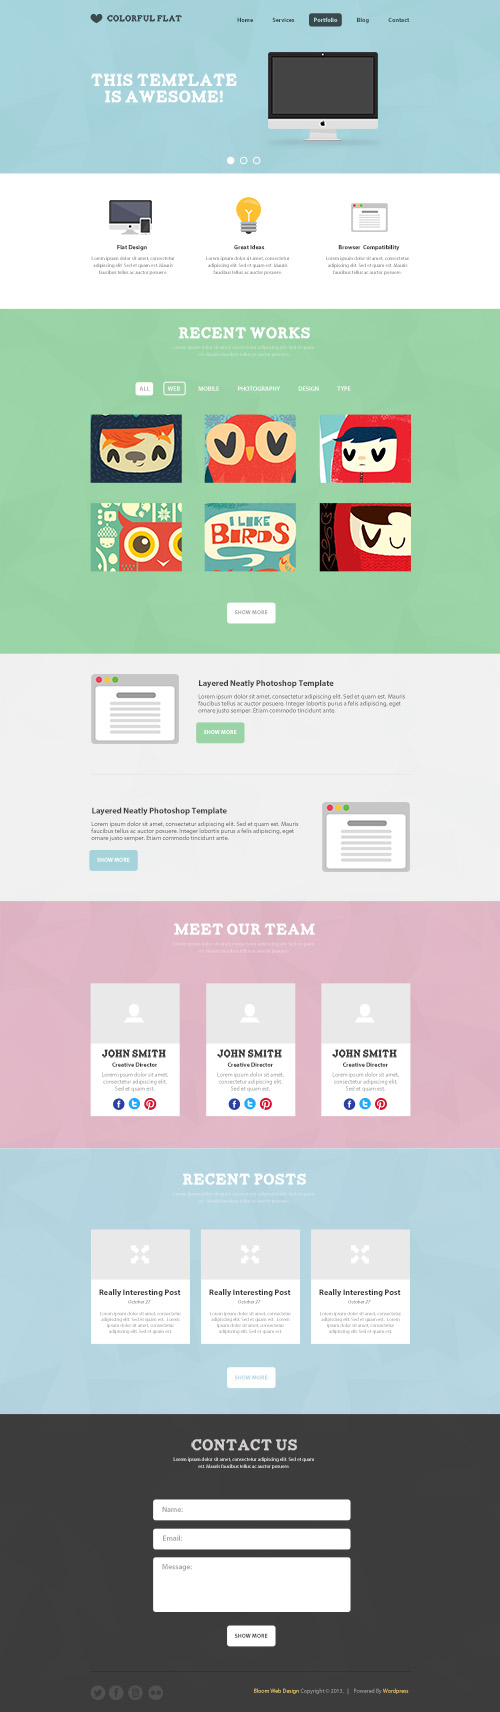 PSD Web Template - Flat One Page